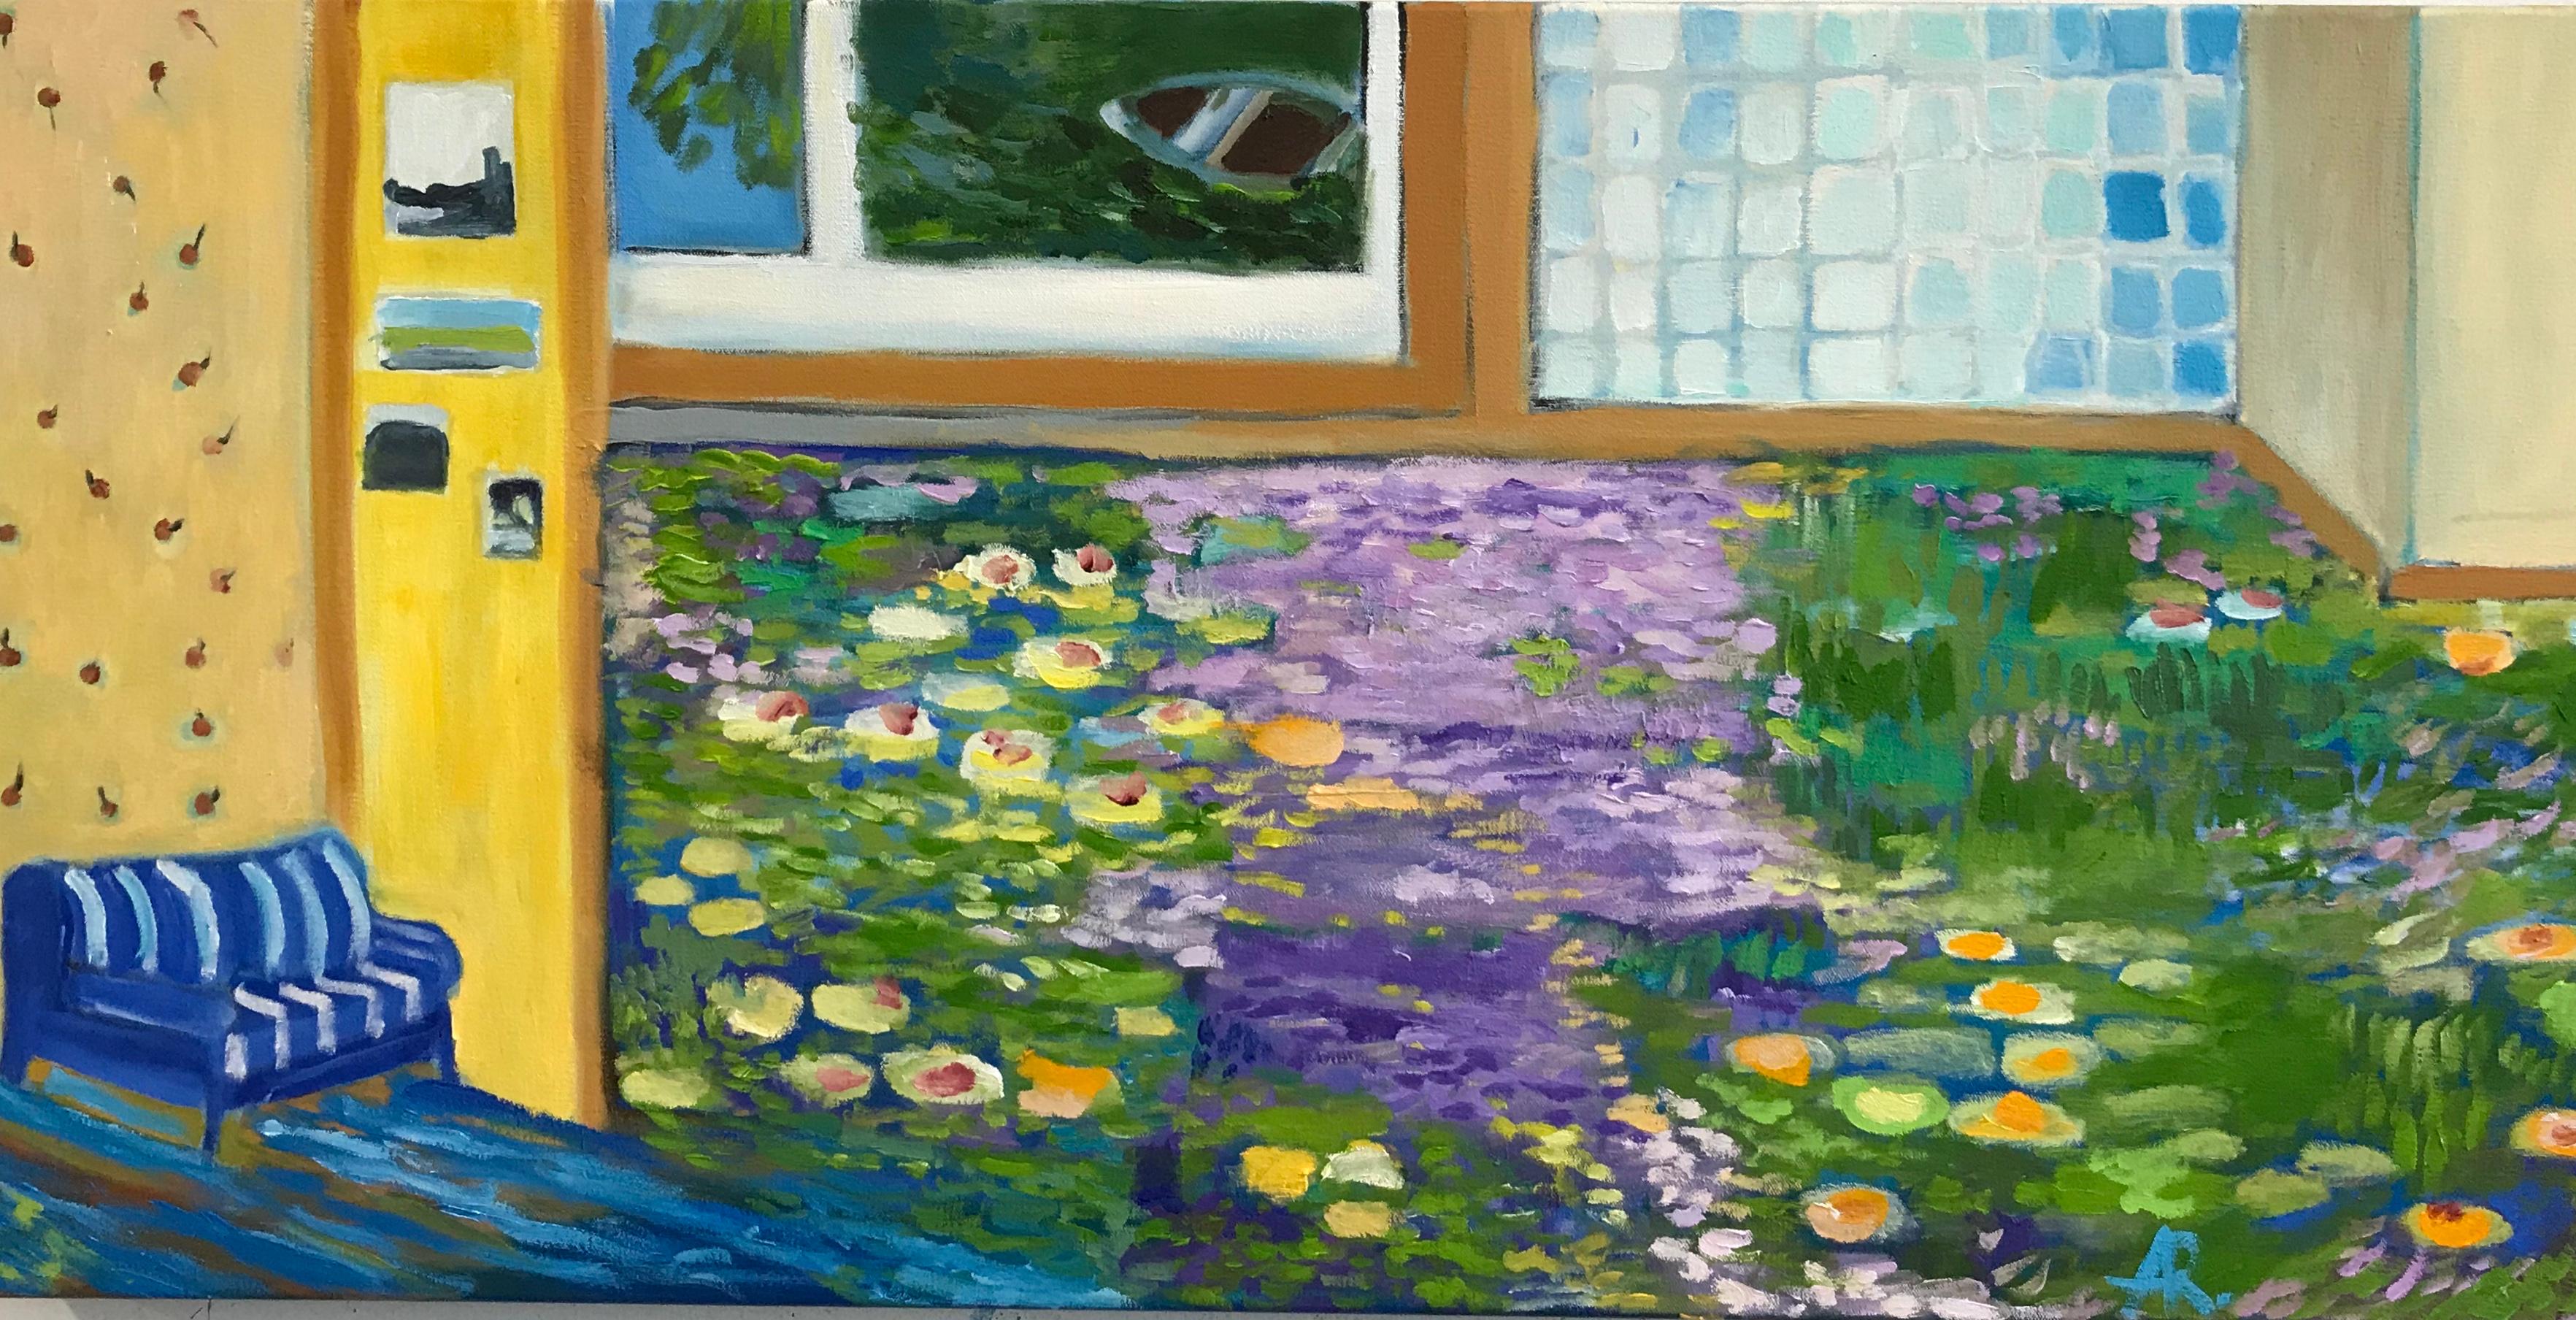 "Flood in Giverny", surreal, lily ponds, Monet, landscape, blue, oil painting - Painting by Alexandra Rozenman